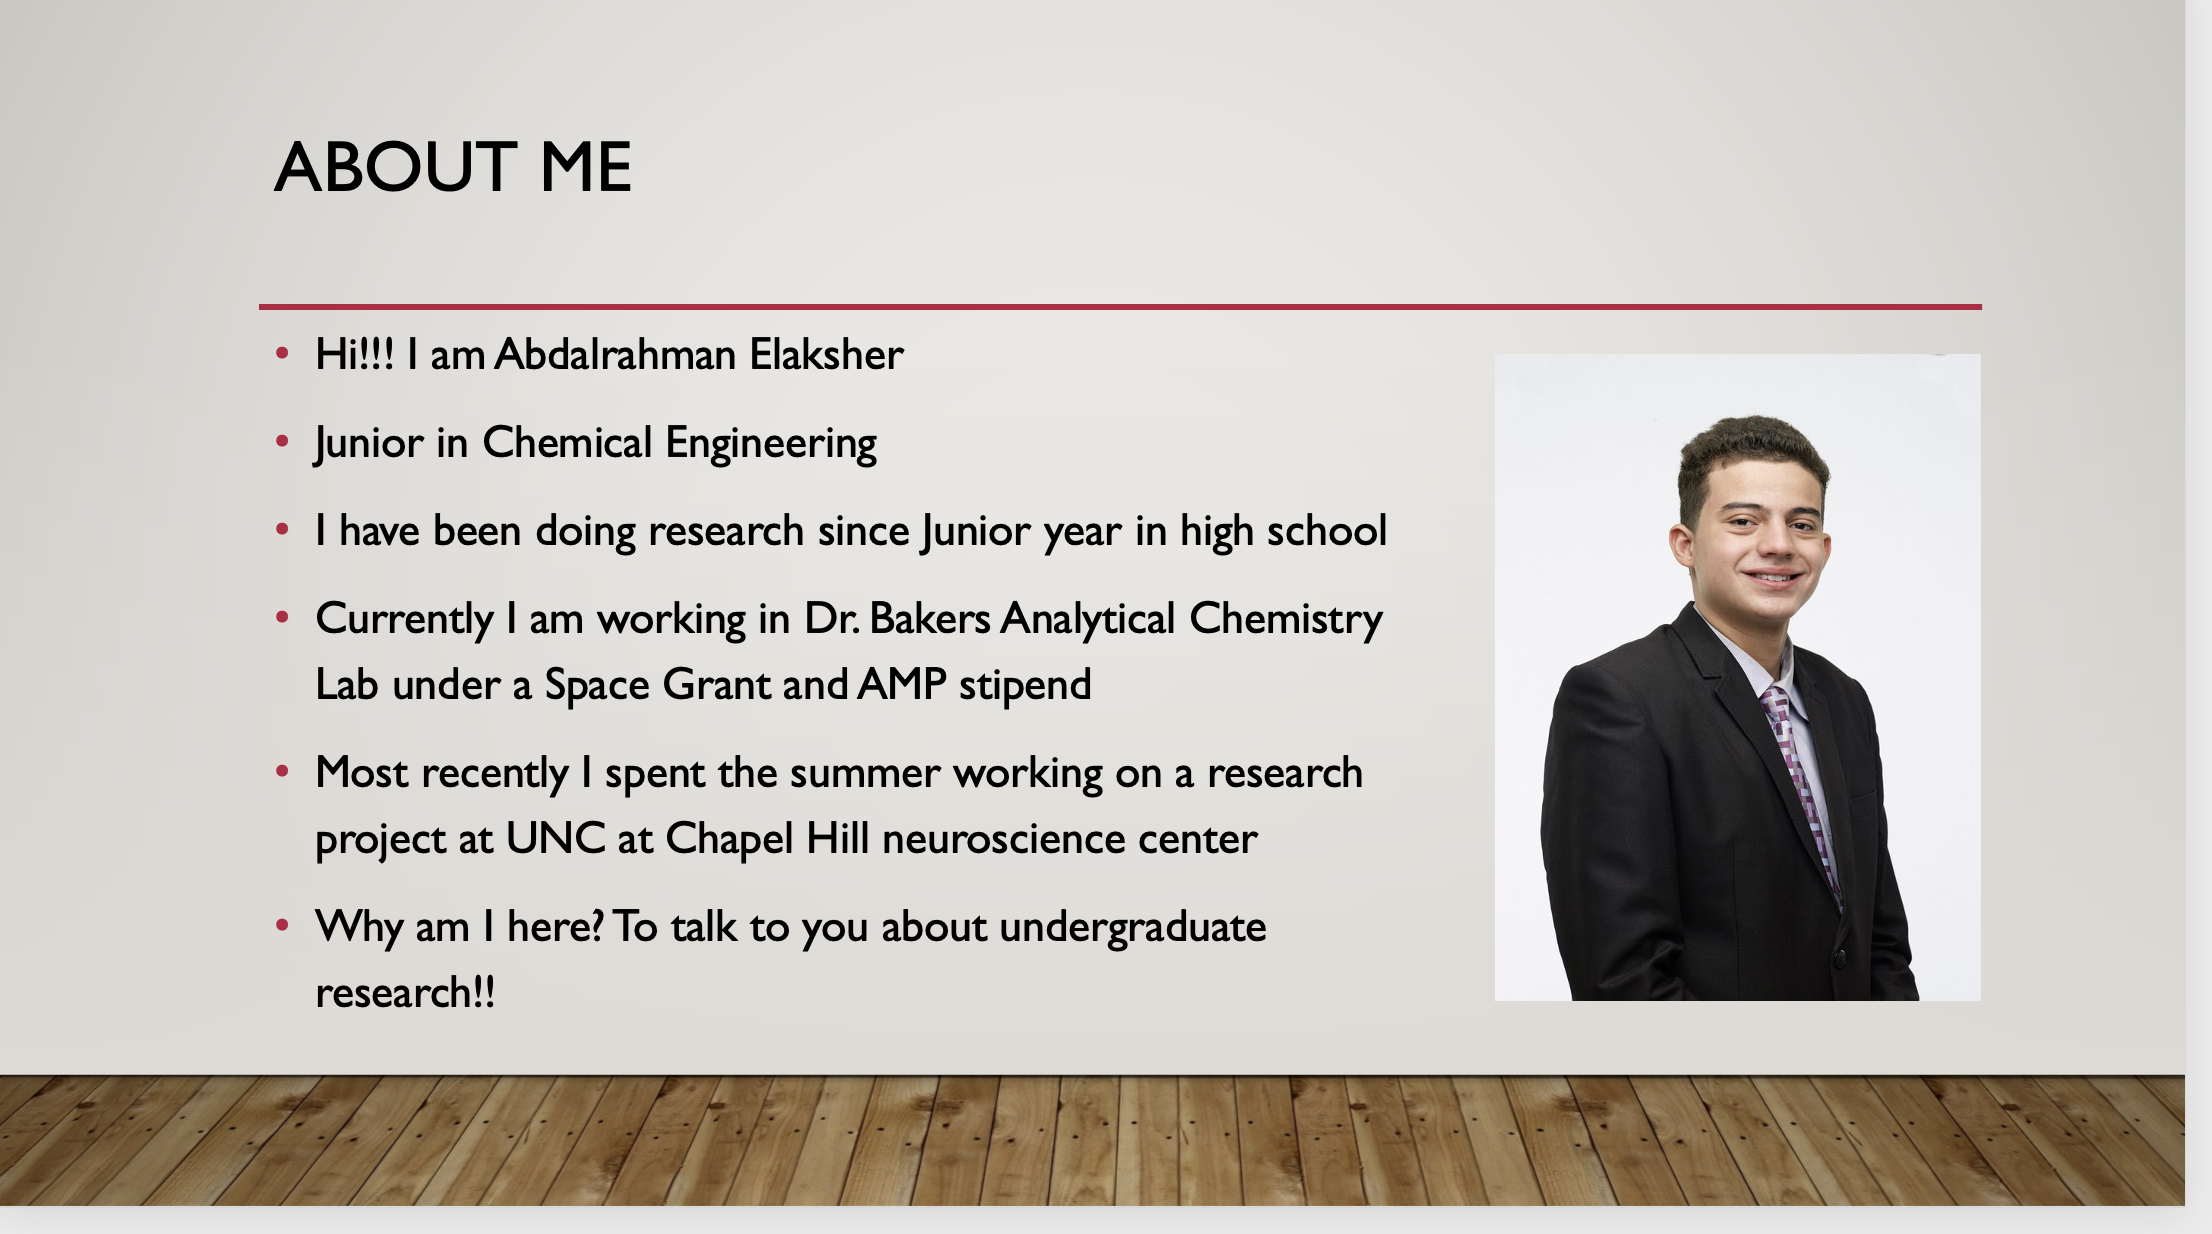 Click for powerpoint by student on his experience finding research opportunities,.